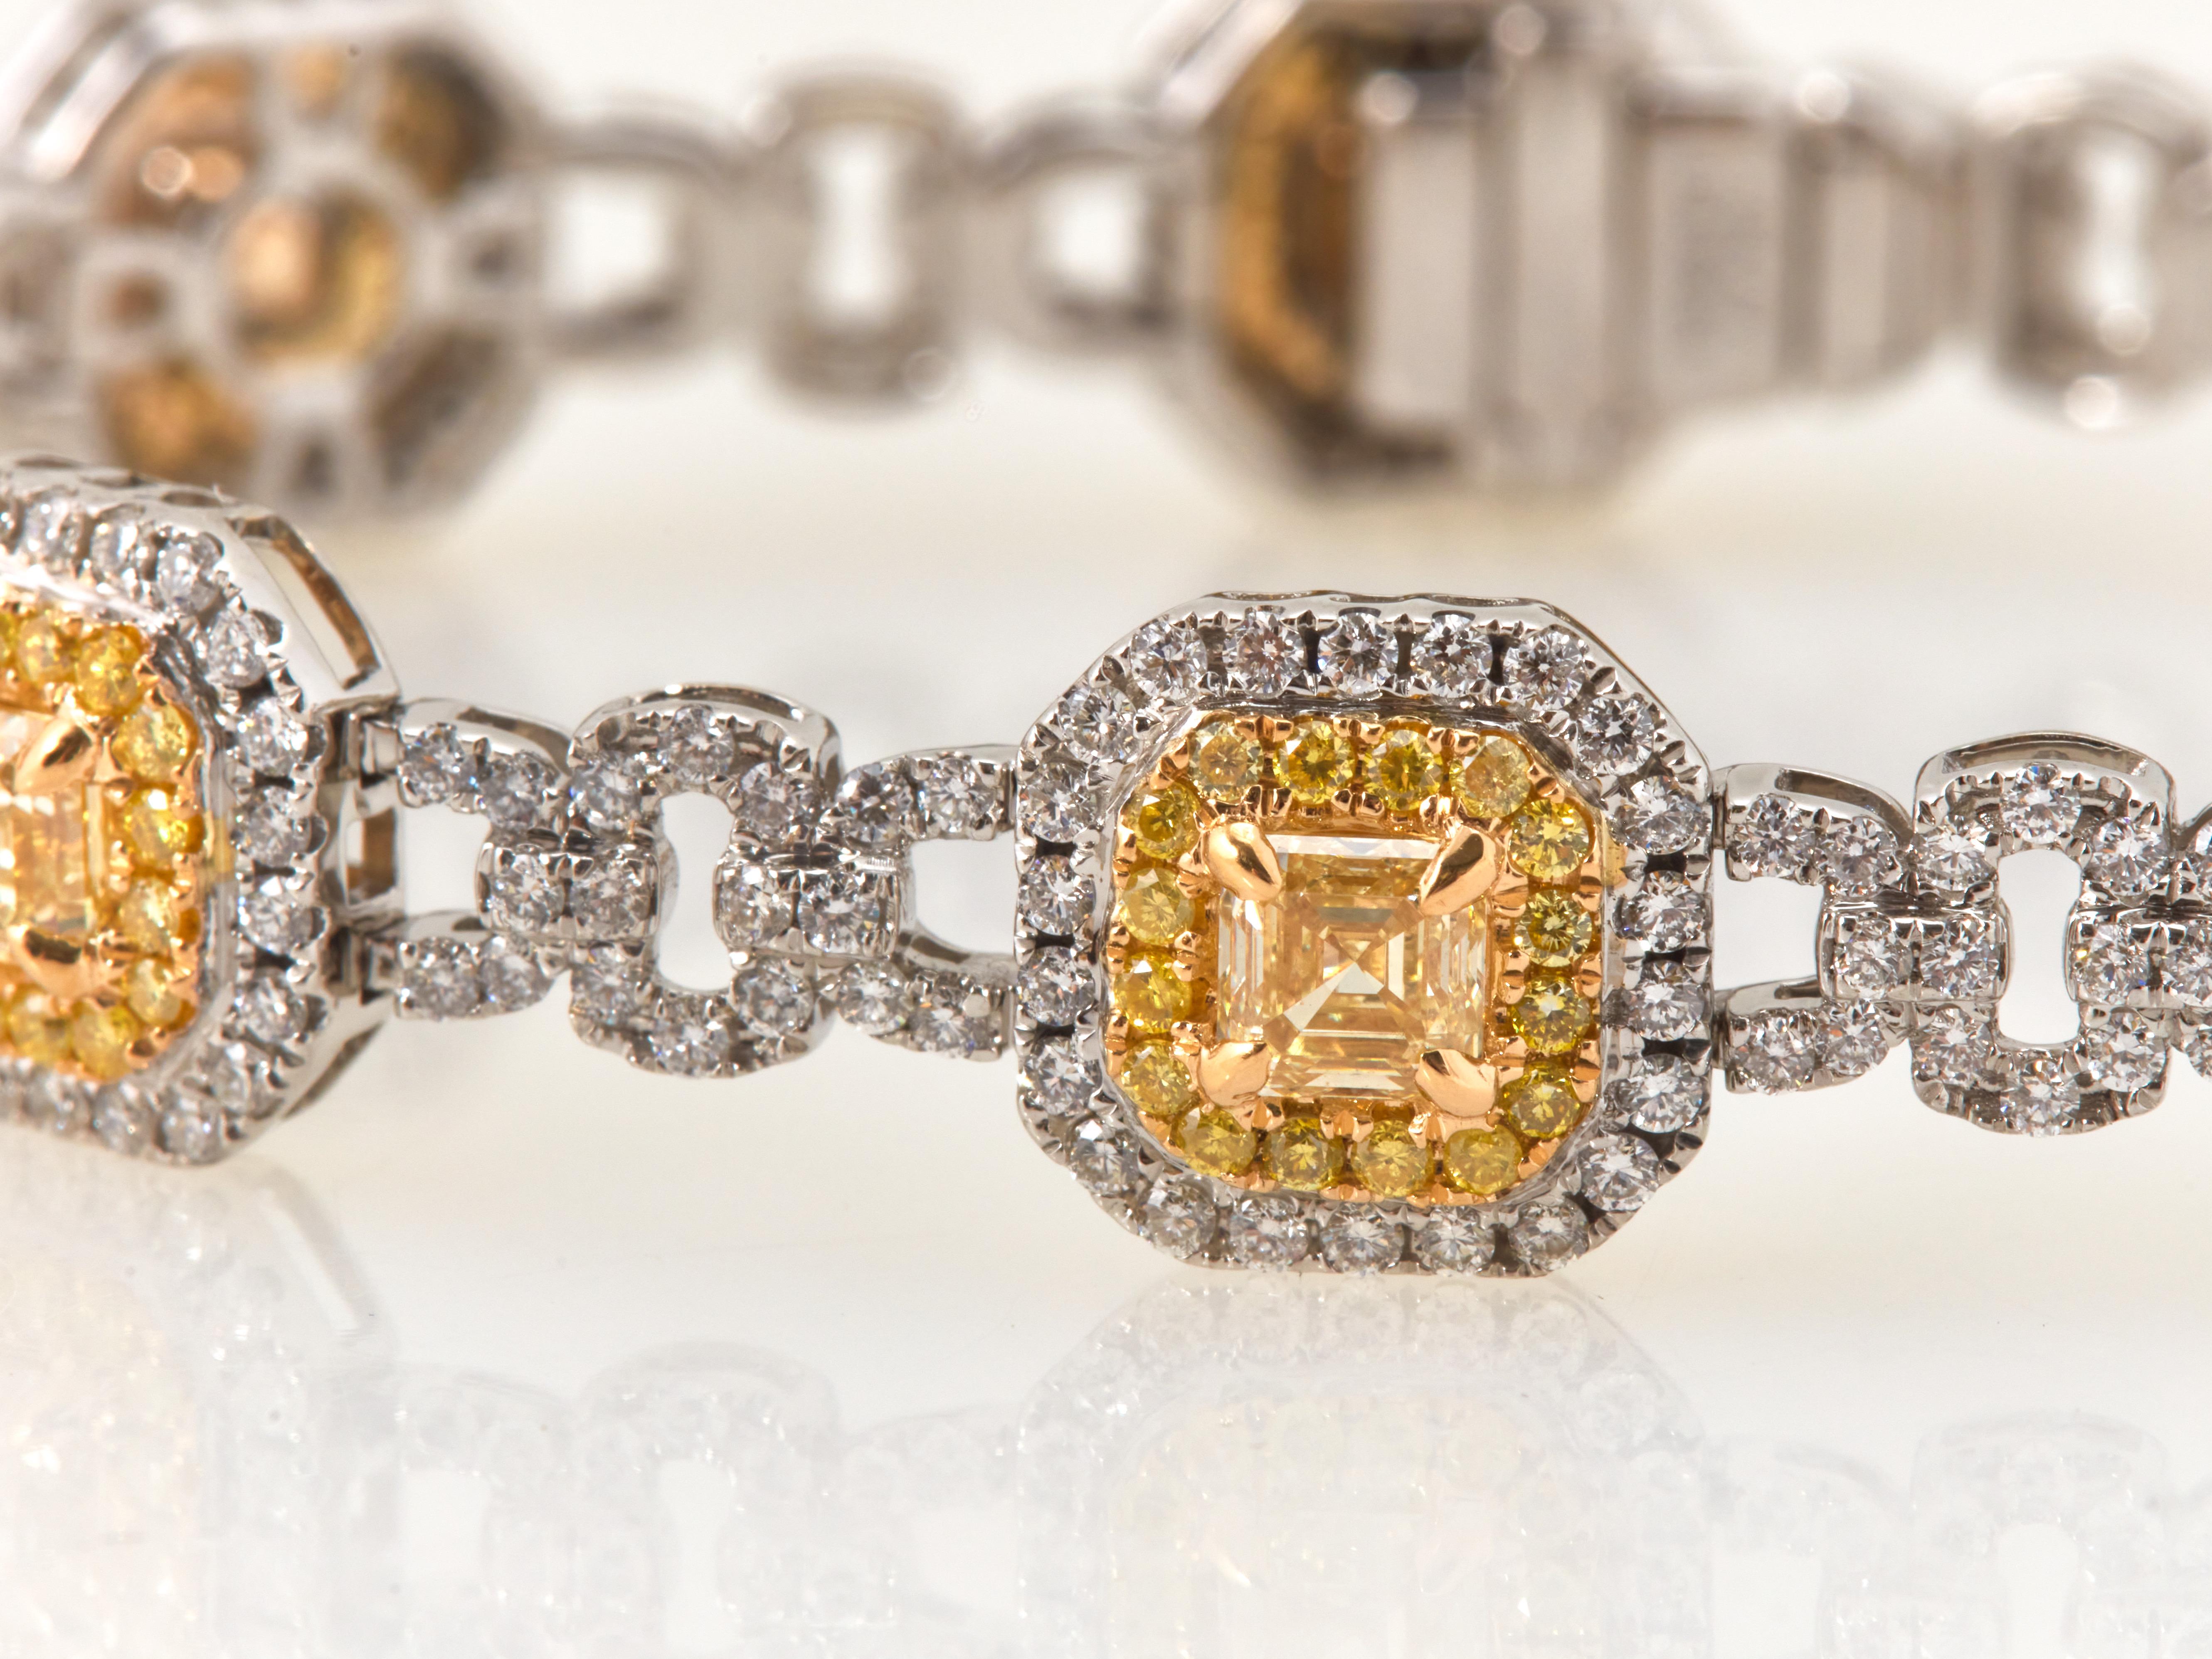 Get ready to be amazed by this stunning bracelet featuring a dazzling 4.93 carat of asscher-cut fancy yellow diamonds at the heart of it. Each yellow diamond is lovingly cradled in 18K white and yellow gold frames, with a surrounding halo of 112